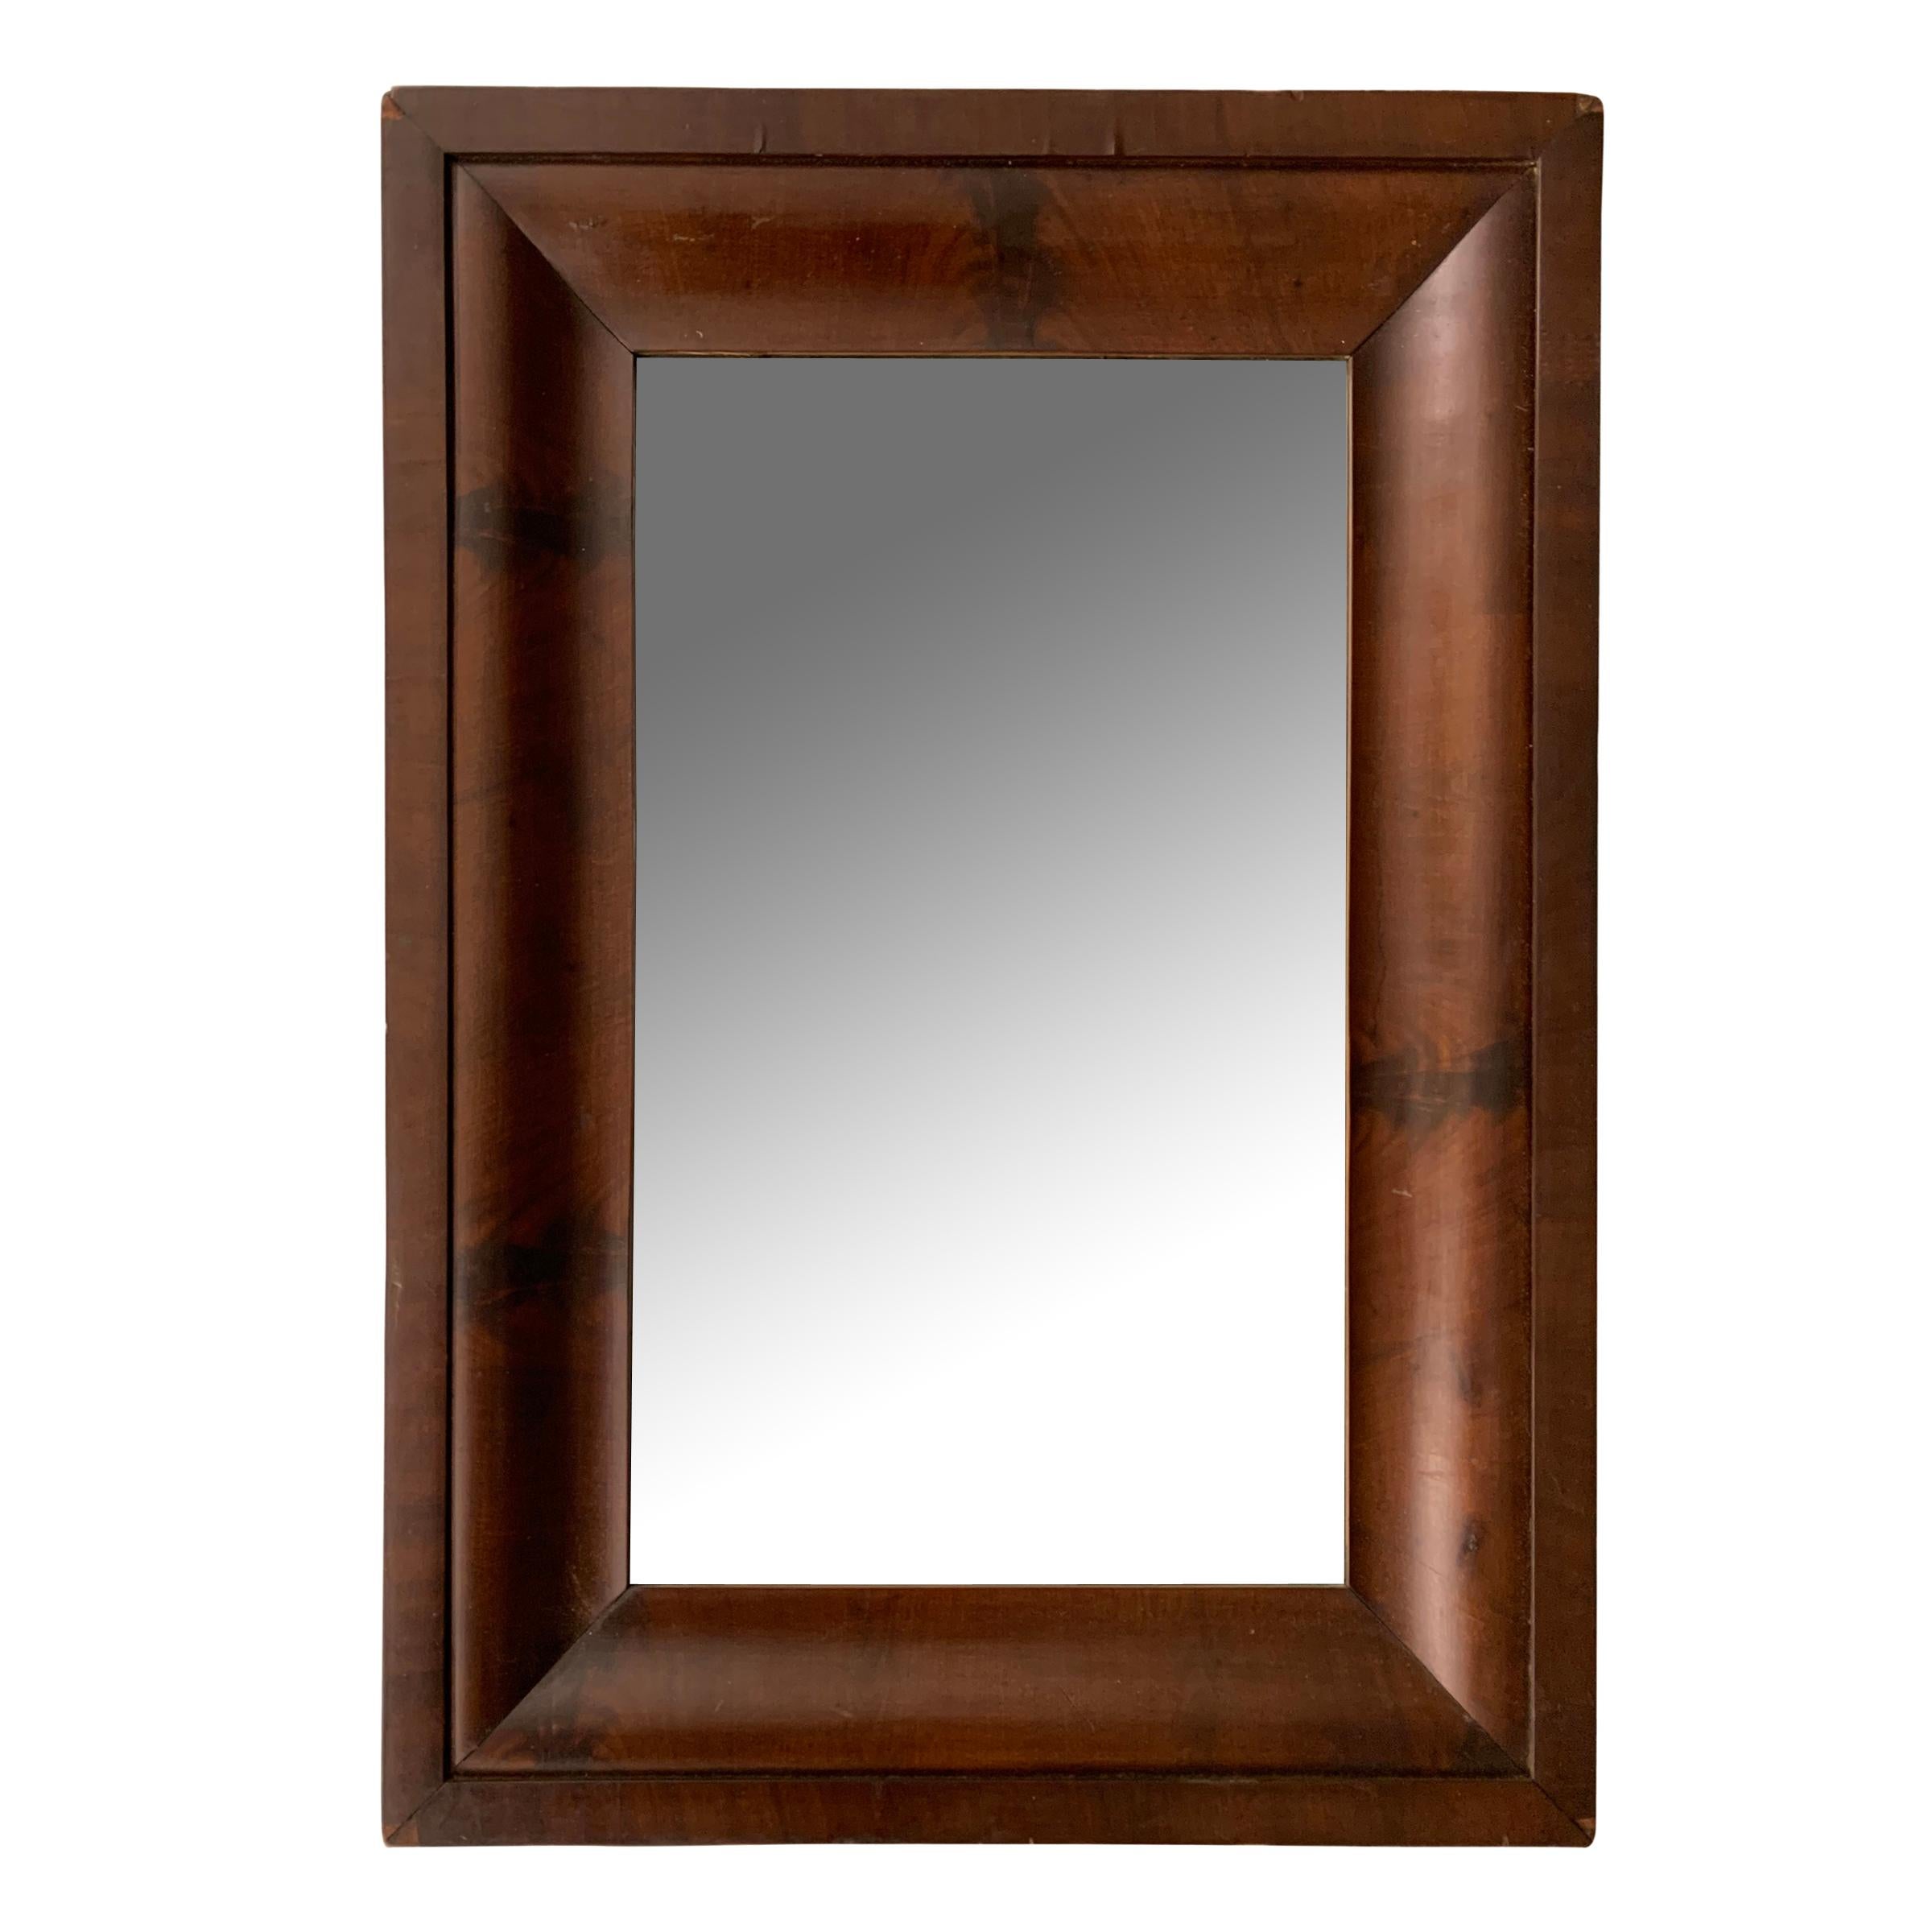 A near pair of early 19th century American Empire wide crotch mahogany veneer framed mirrors with wonderful figural grain patterns. Perfect over a pair of console or bedside tables!